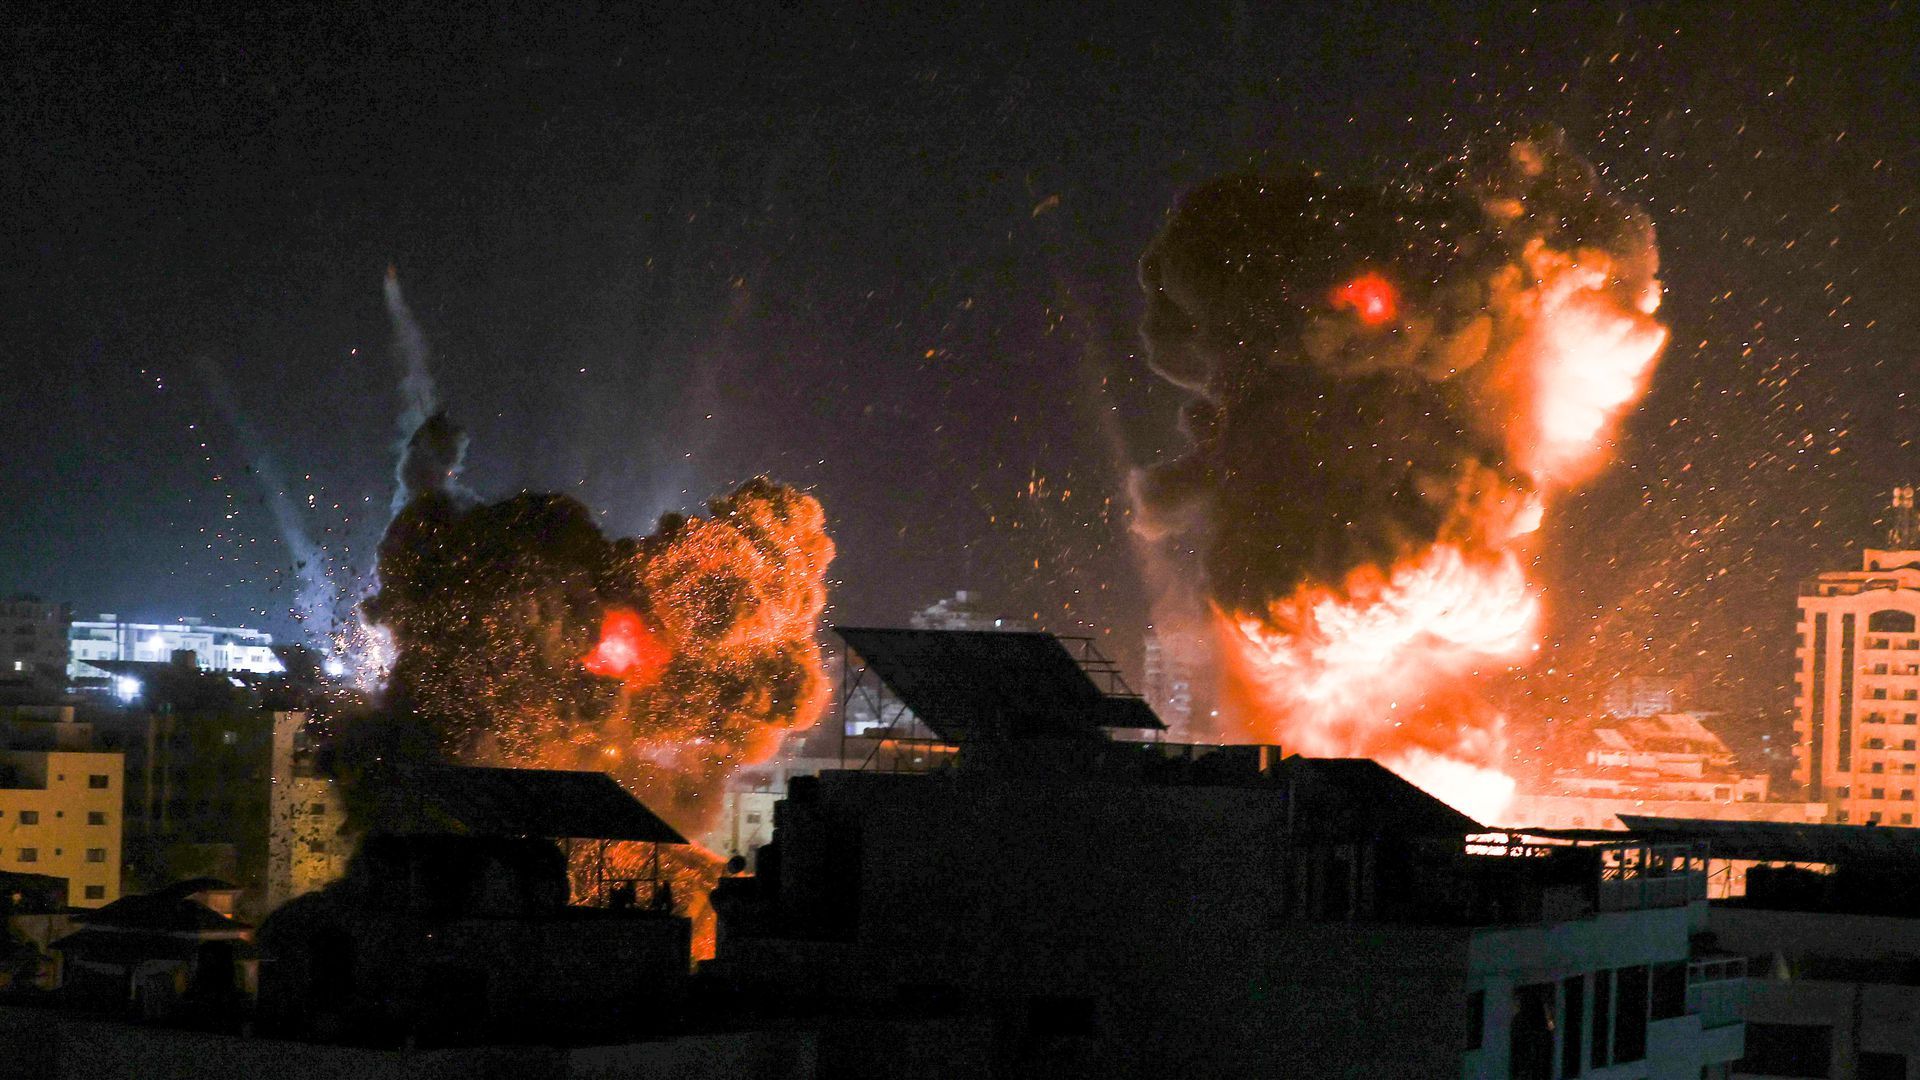 Explosions light-up the sky above buildings in Gaza City as Israeli forces shell the Palestinian enclave early on May 18.